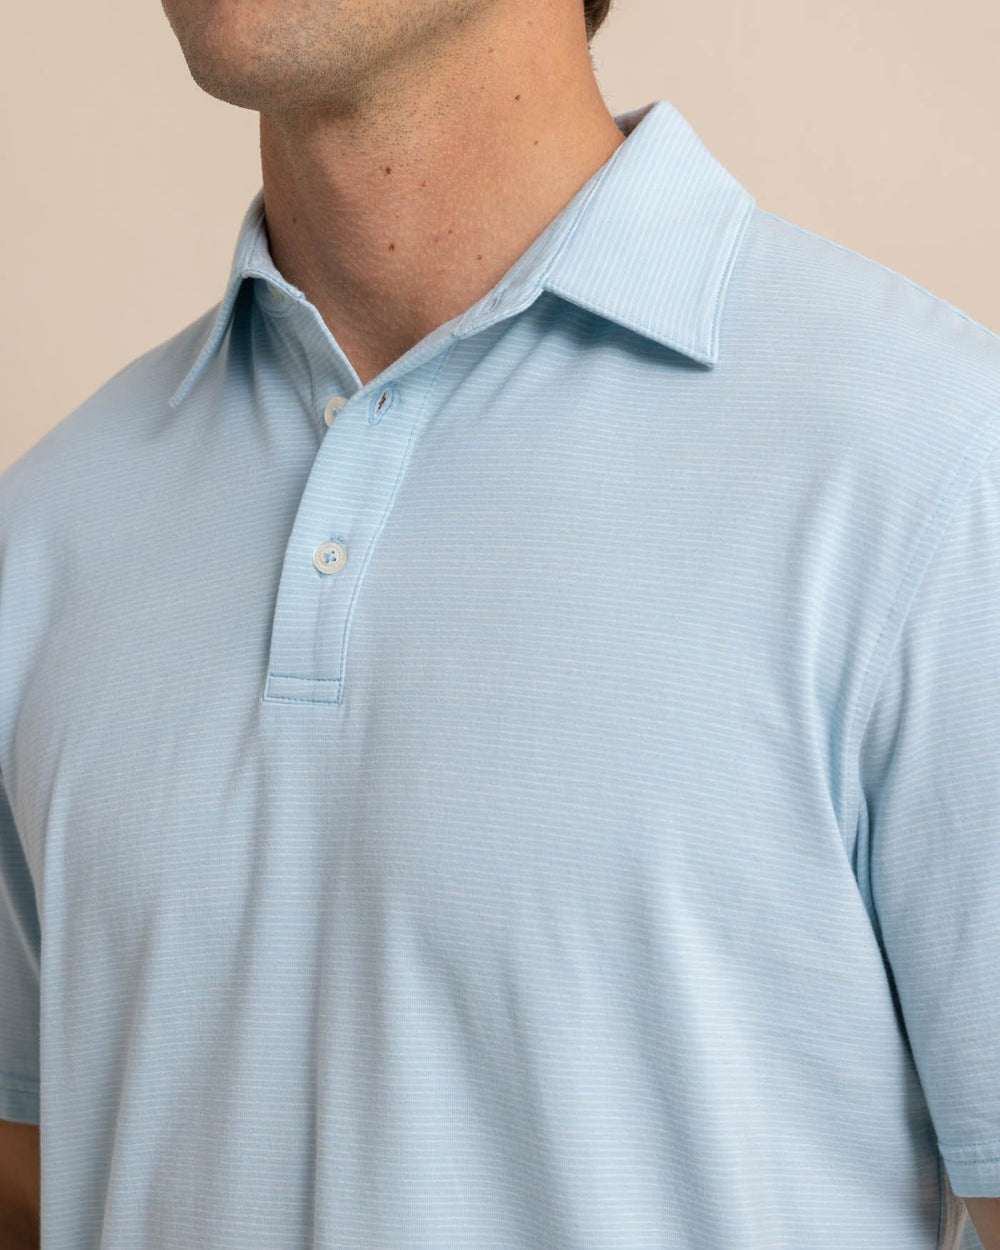 The detail view of the Southern Tide The Seaport Davenport Stripe Polo by Southern Tide - Clearwater Blue